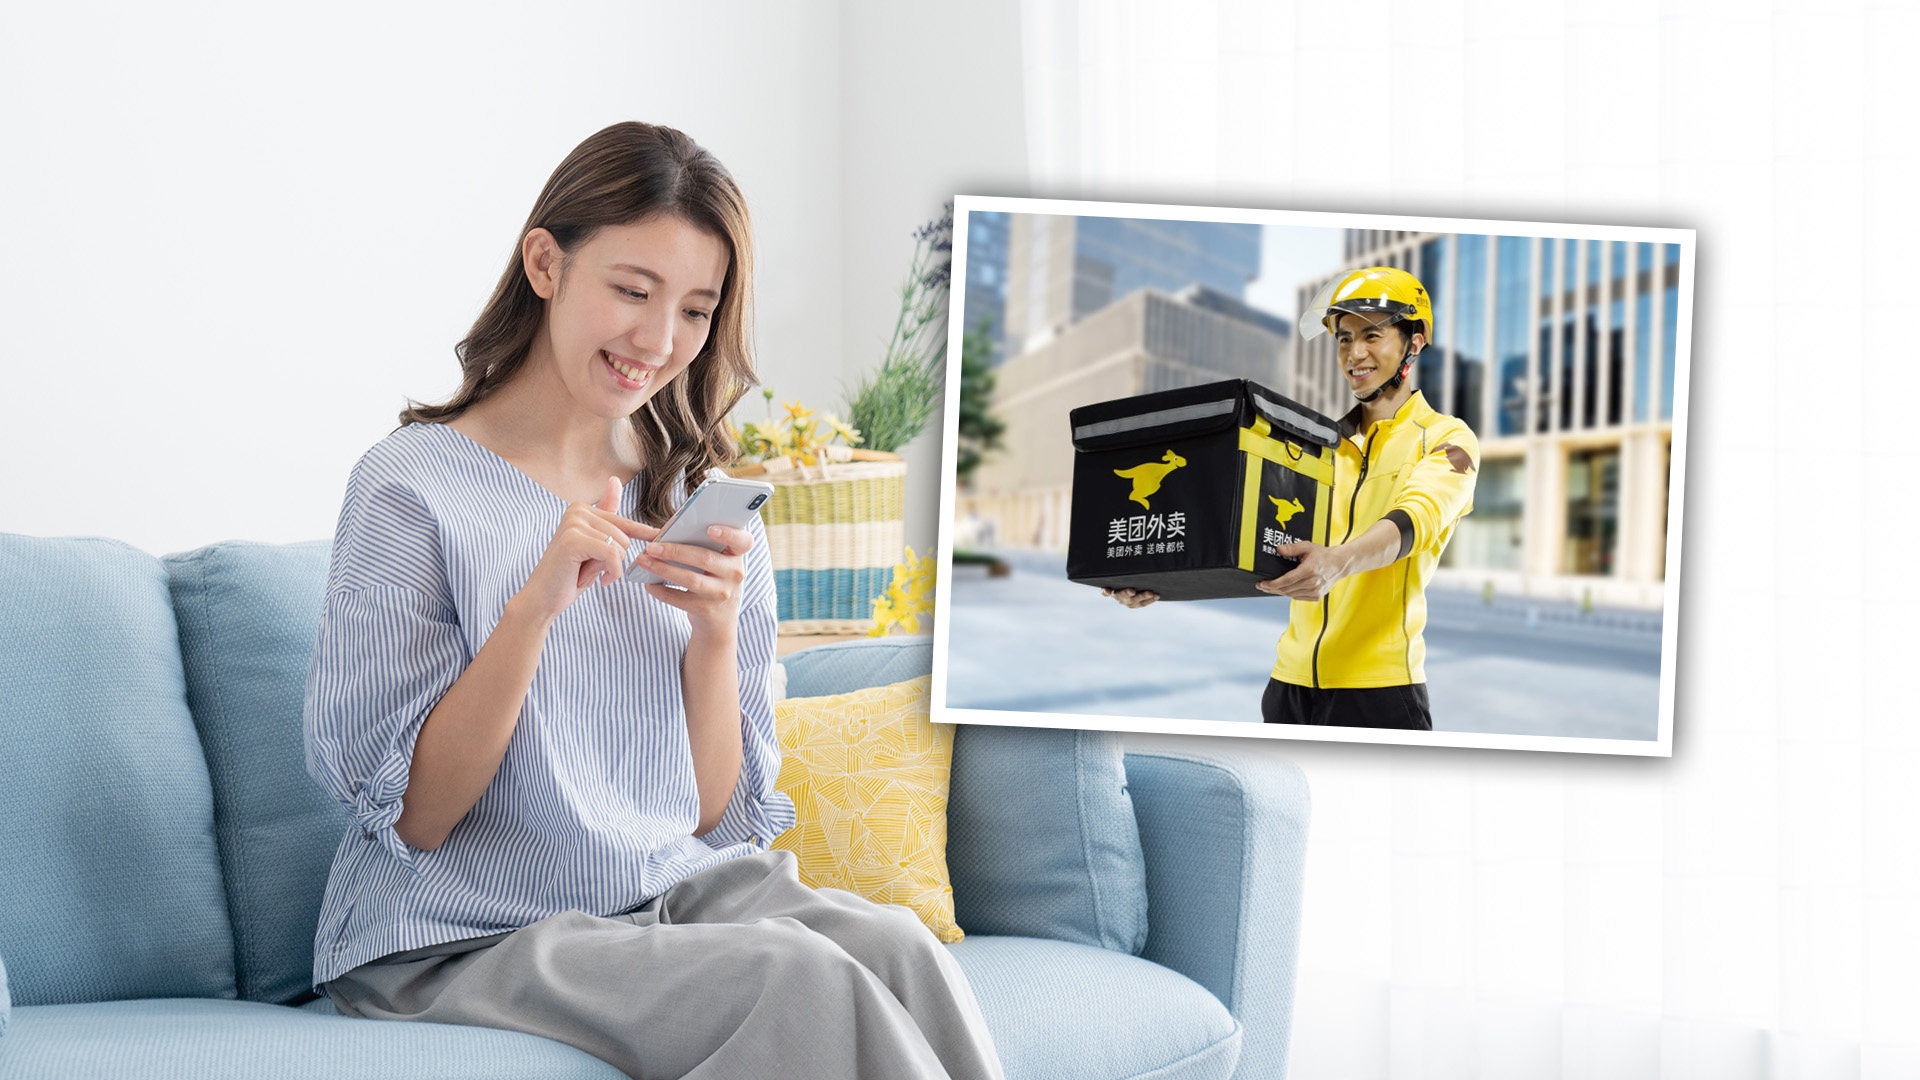 After cancelling an online grocery order, a Hong Kong woman was surprised that the driver helped return the items for no charge so she could receive a full refund. Photo: SCMP composite